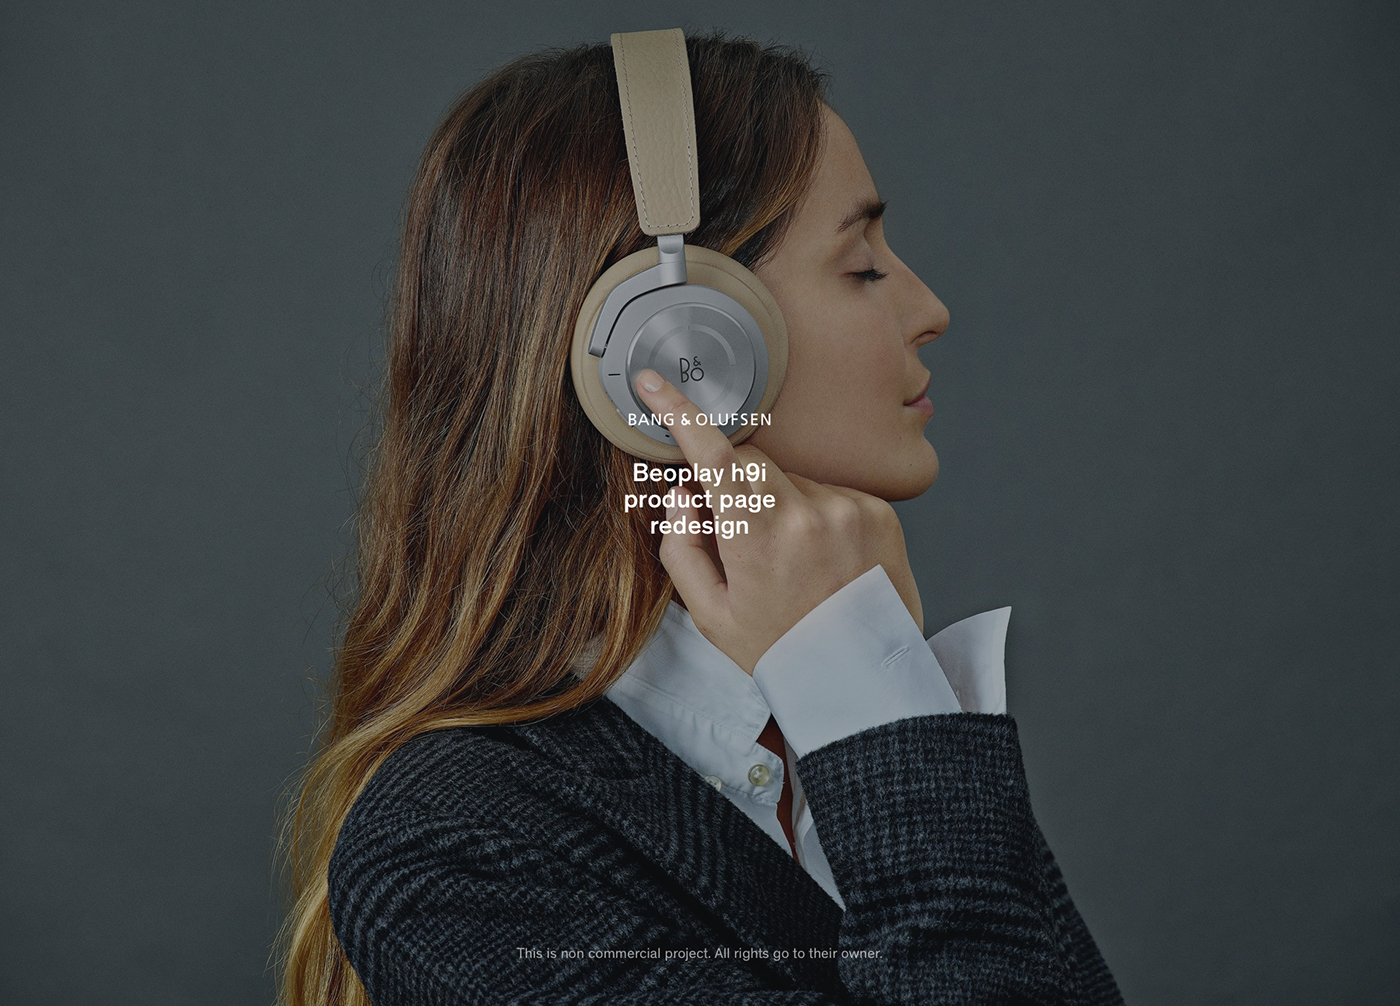 Product Page screen design idea #231: Bang & Olufsen Beoplay